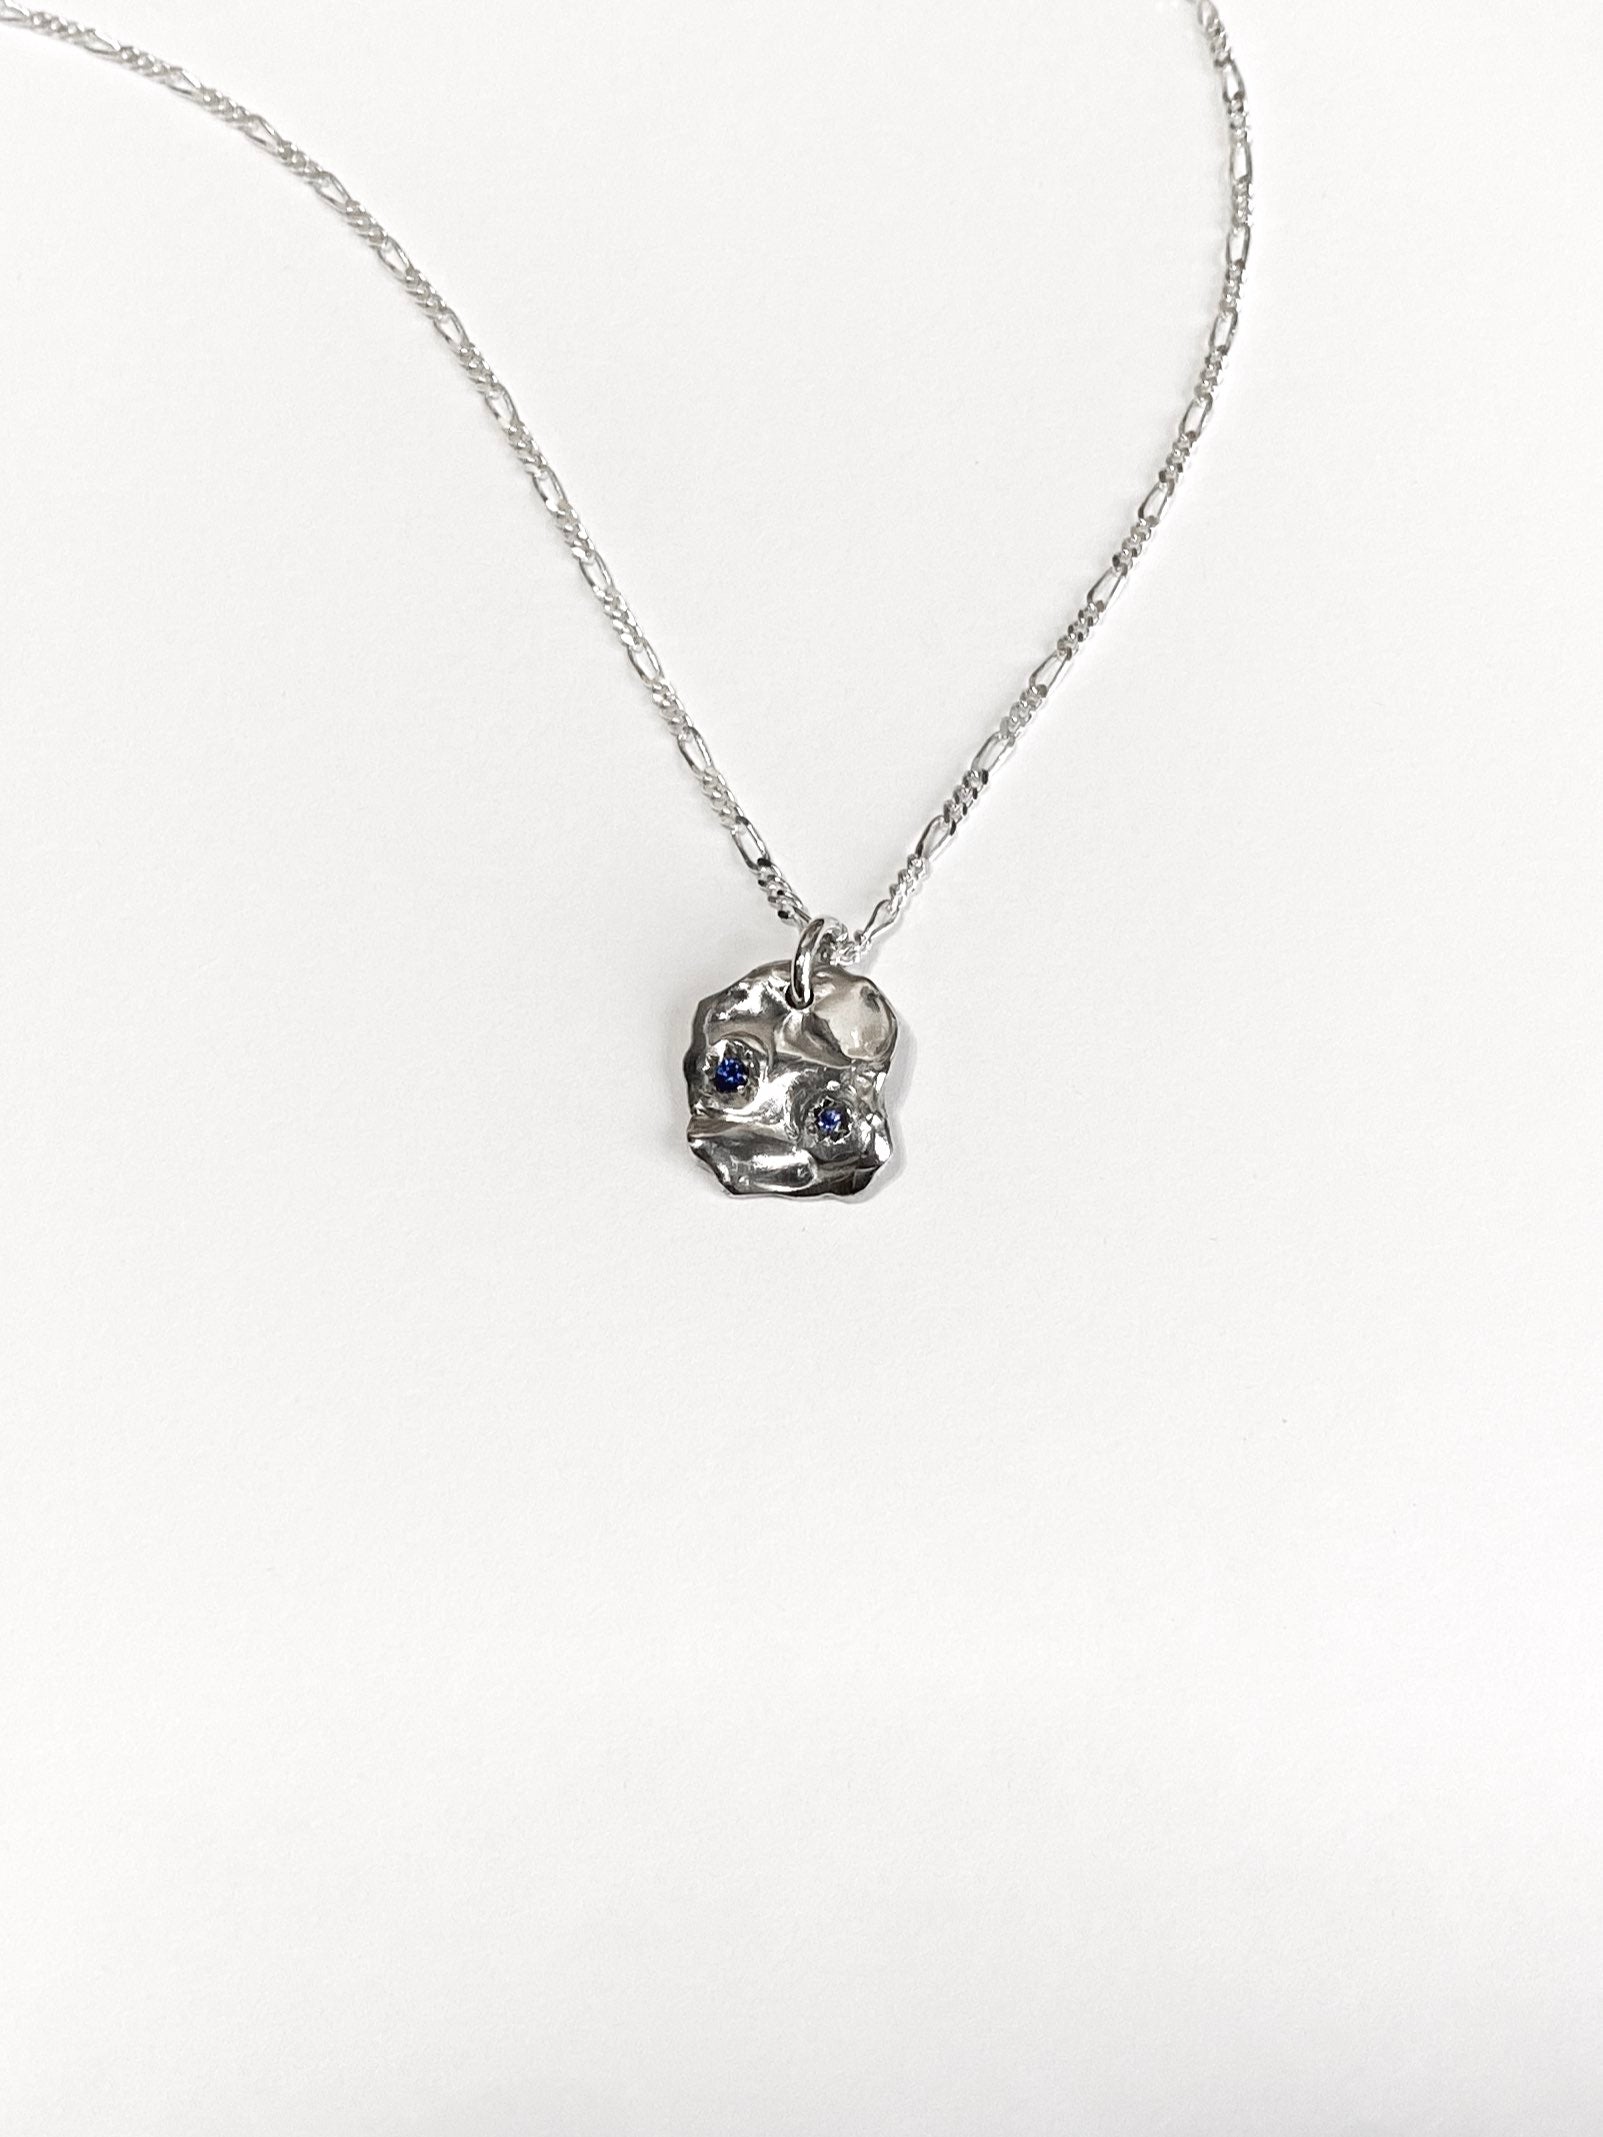 Silver molten pendant with 2 blue sapphires on chain on white background